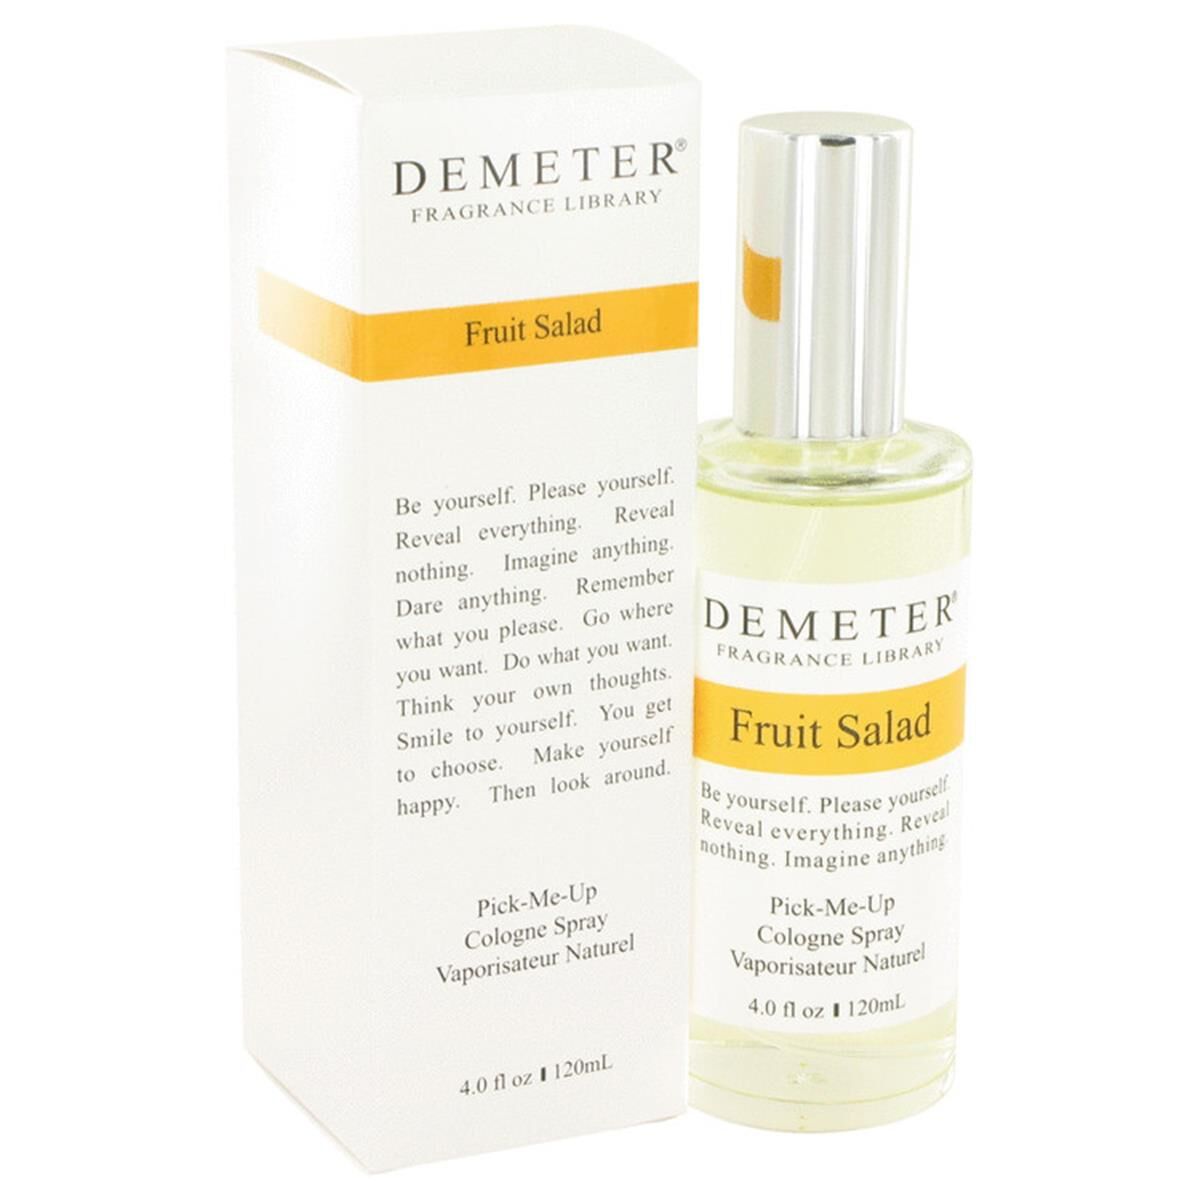 Demeter 452567 Fruit Salad Cologne Spray - Formerly Jelly Belly for Women, 4 oz One Size female